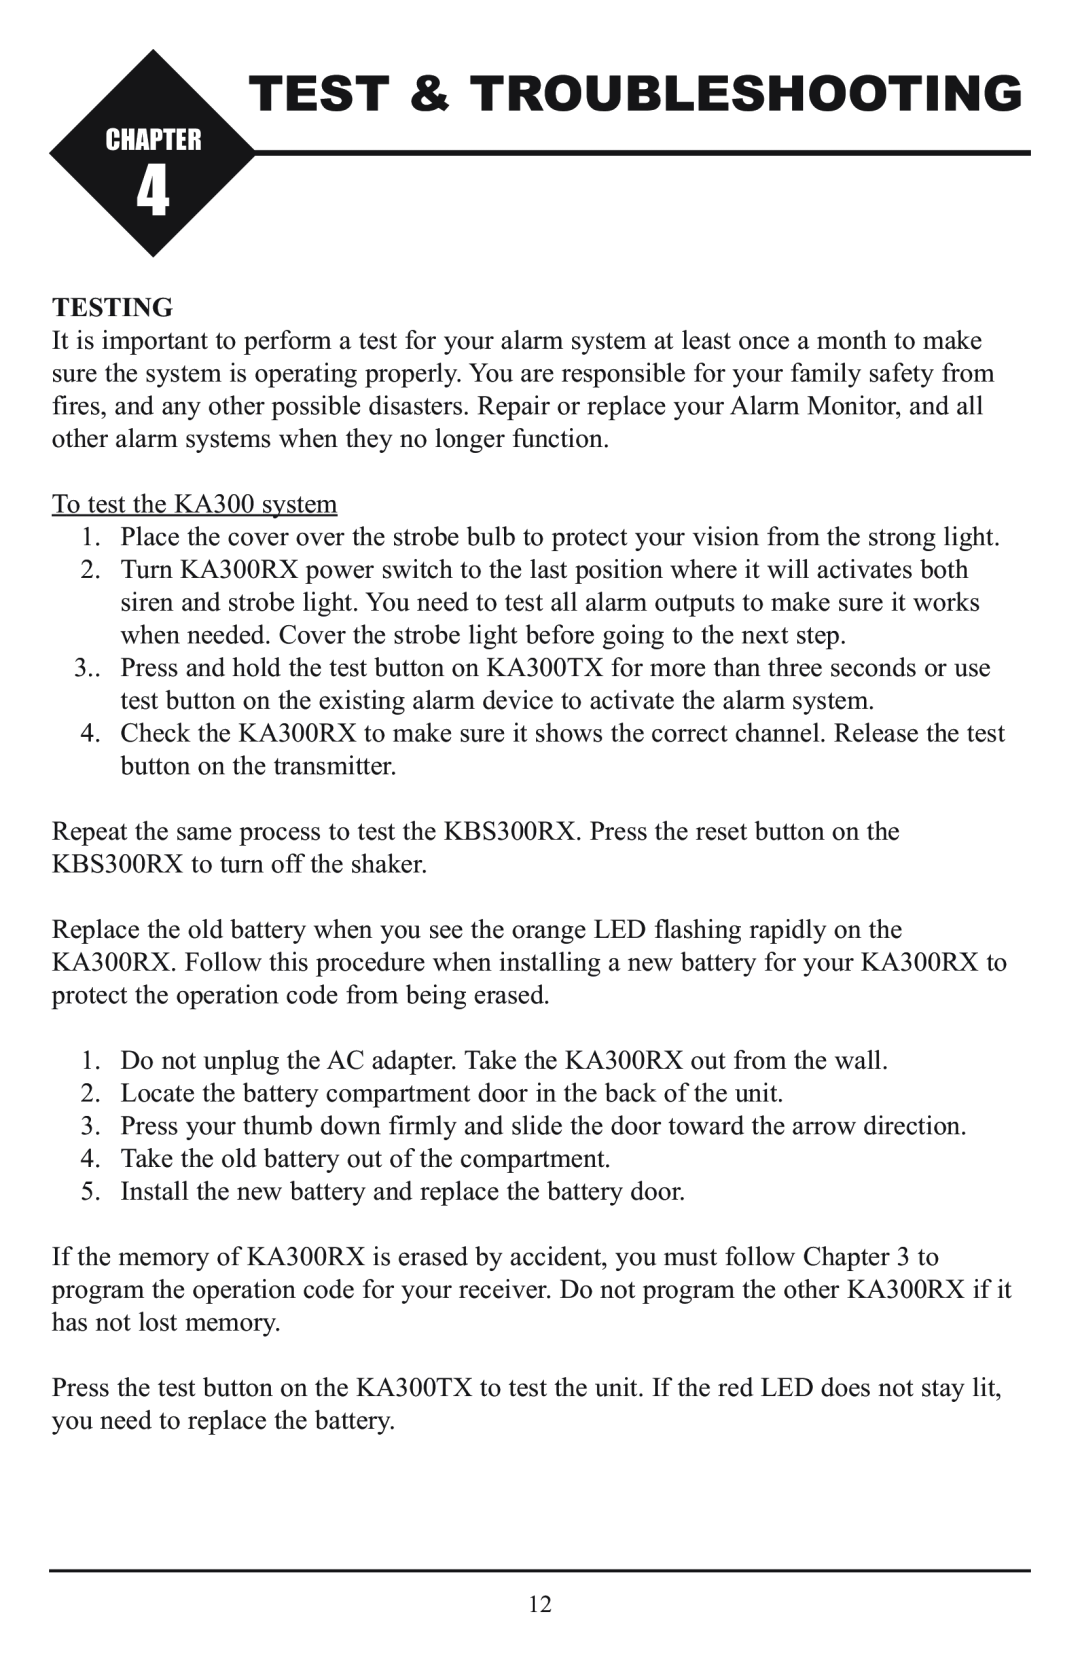 Krown Manufacturing KBS300RX instruction manual Test & Troubleshooting, Chapter, Testing 